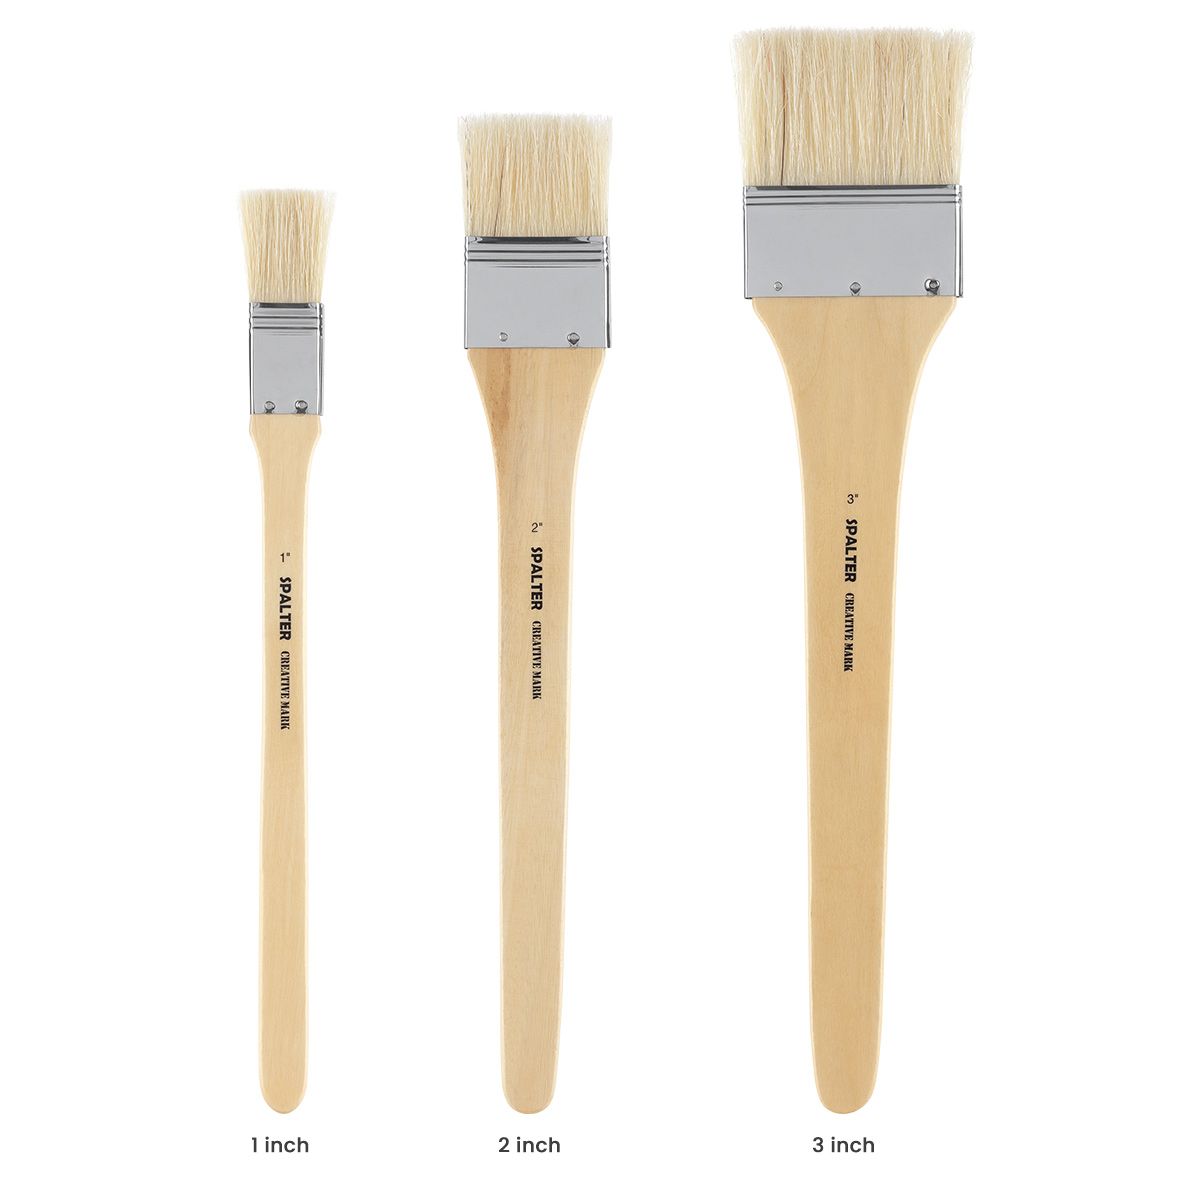 Set includes: 1", 2" and 3" wide, flat brushes